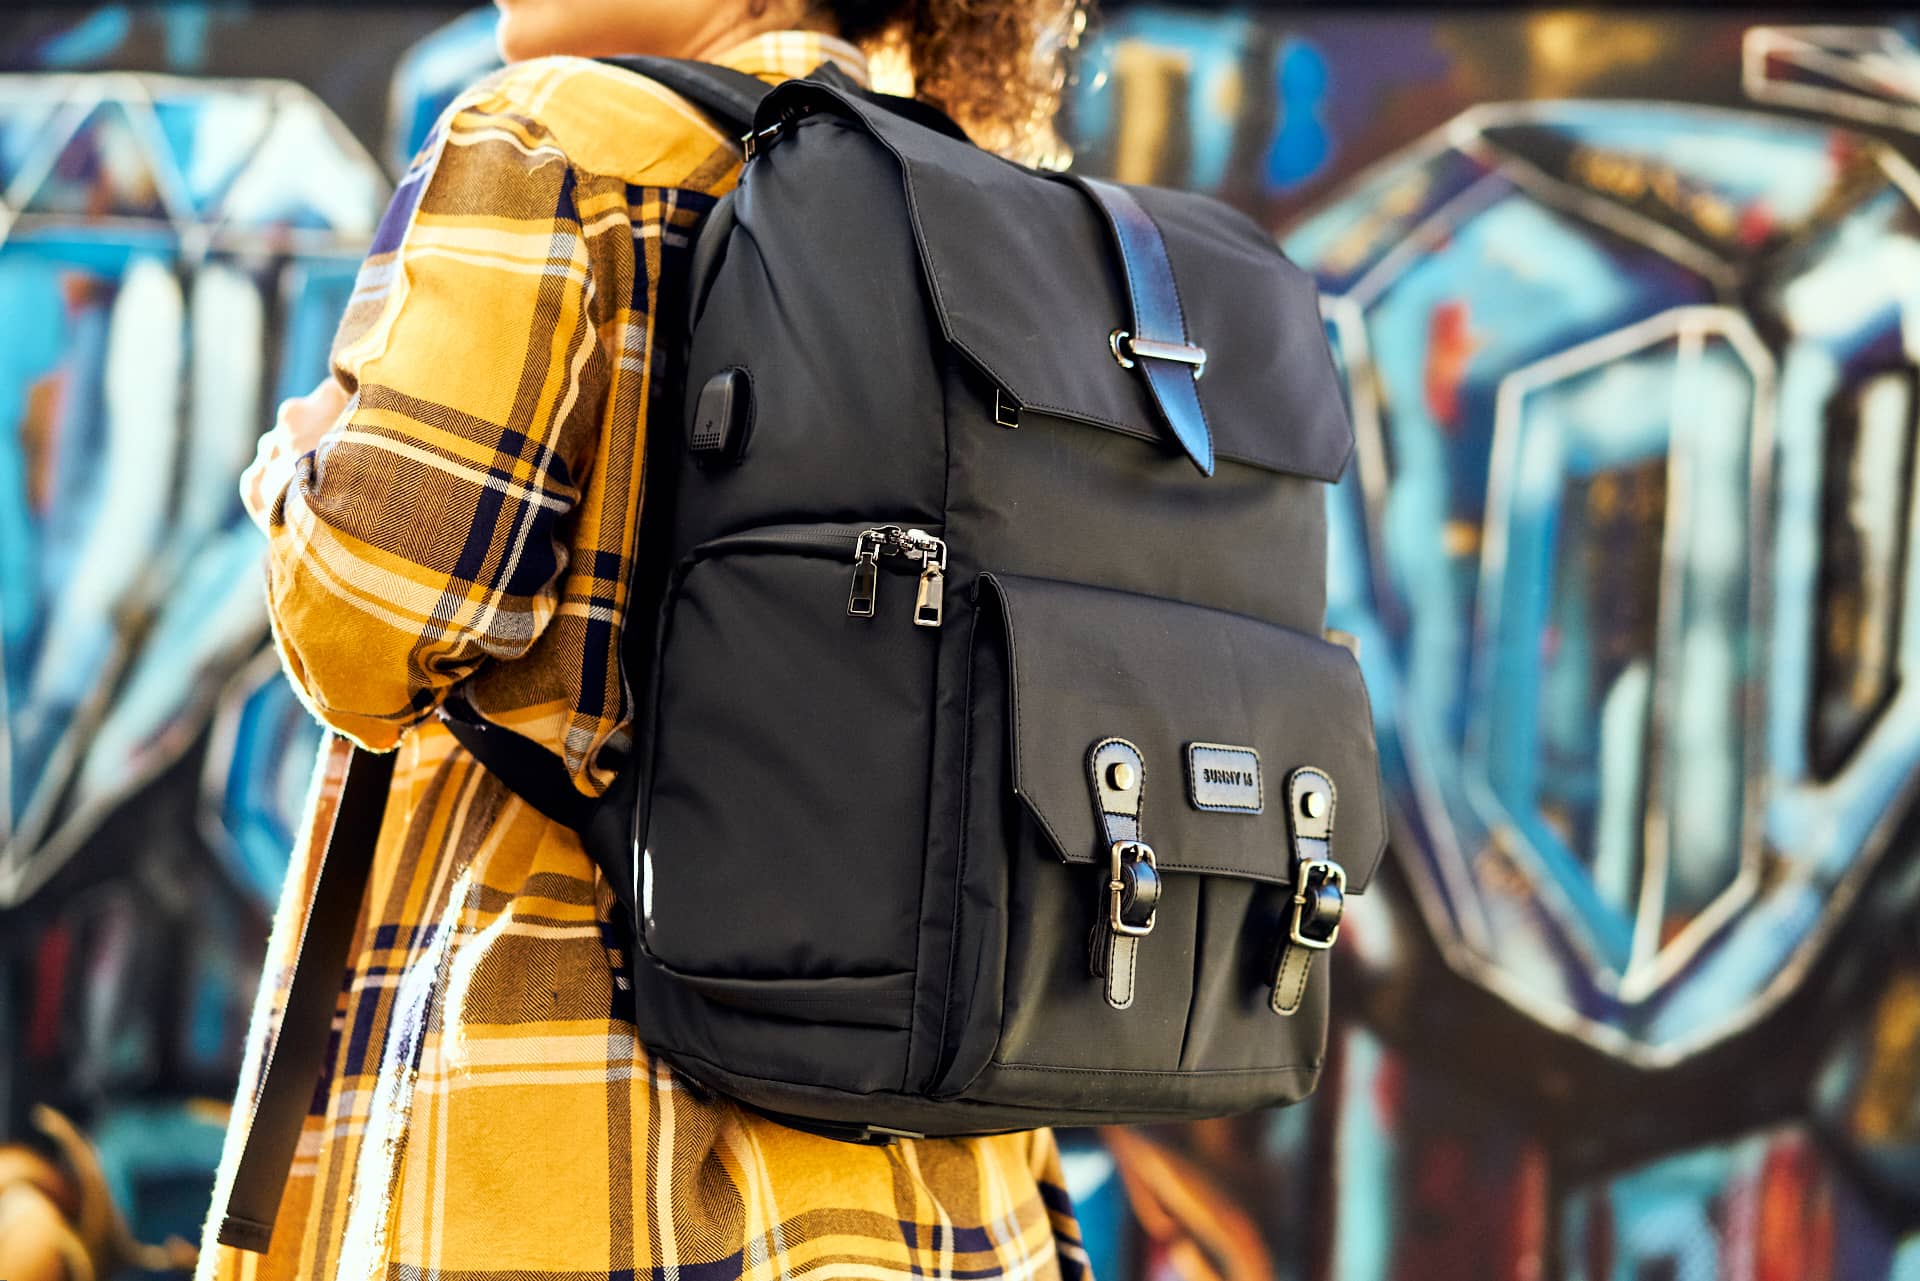 The Ultimate Travel Backpack for Photographers: The Sunny 16 Voyager